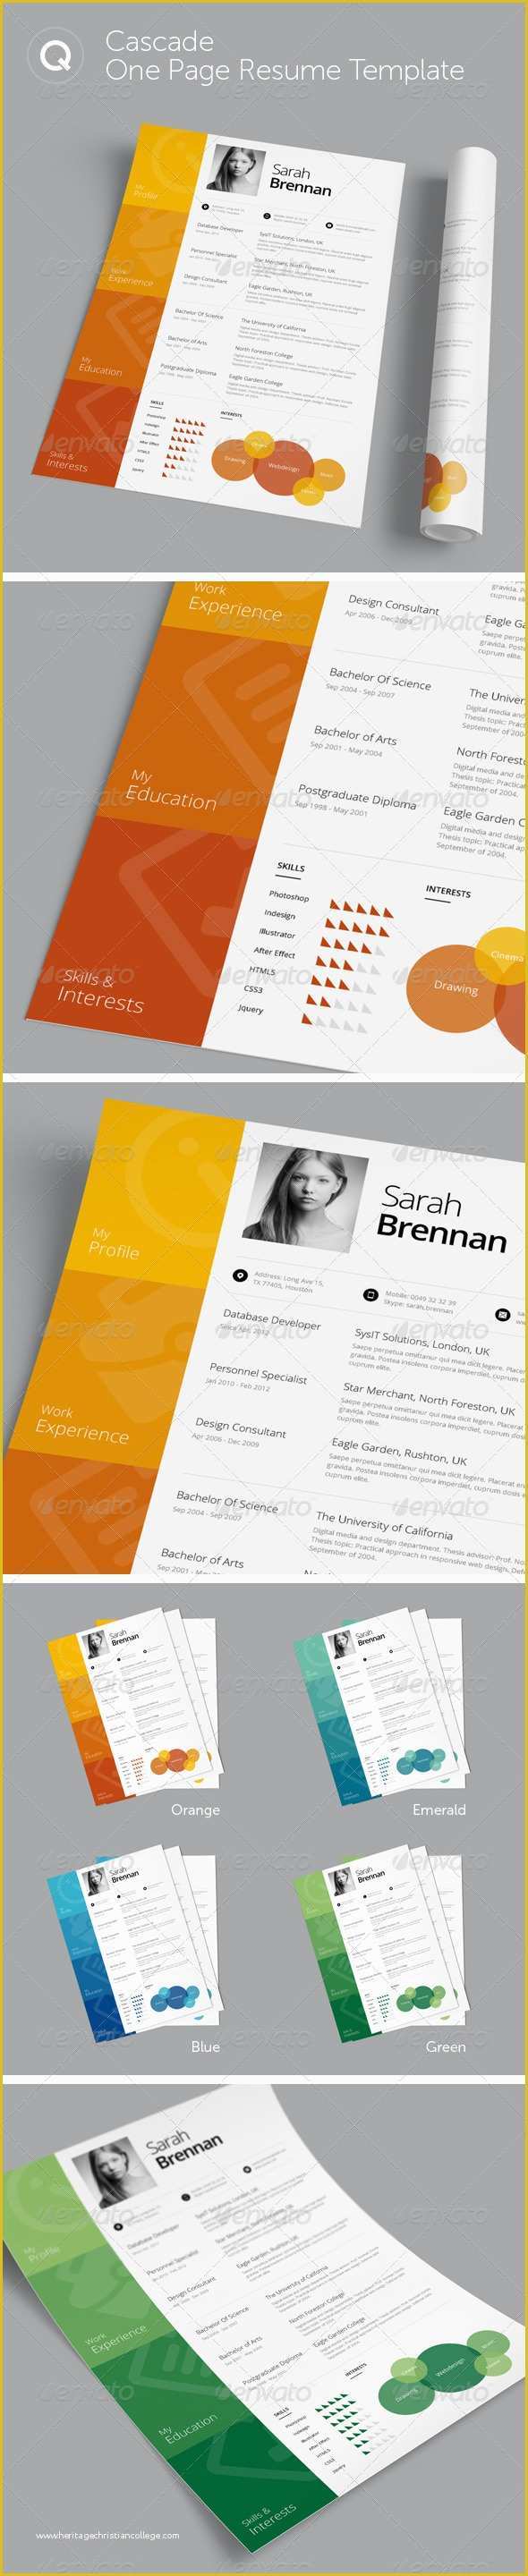 Free Cascade Resume Template Of Cascade E Page Resume Template by Quanticalabs